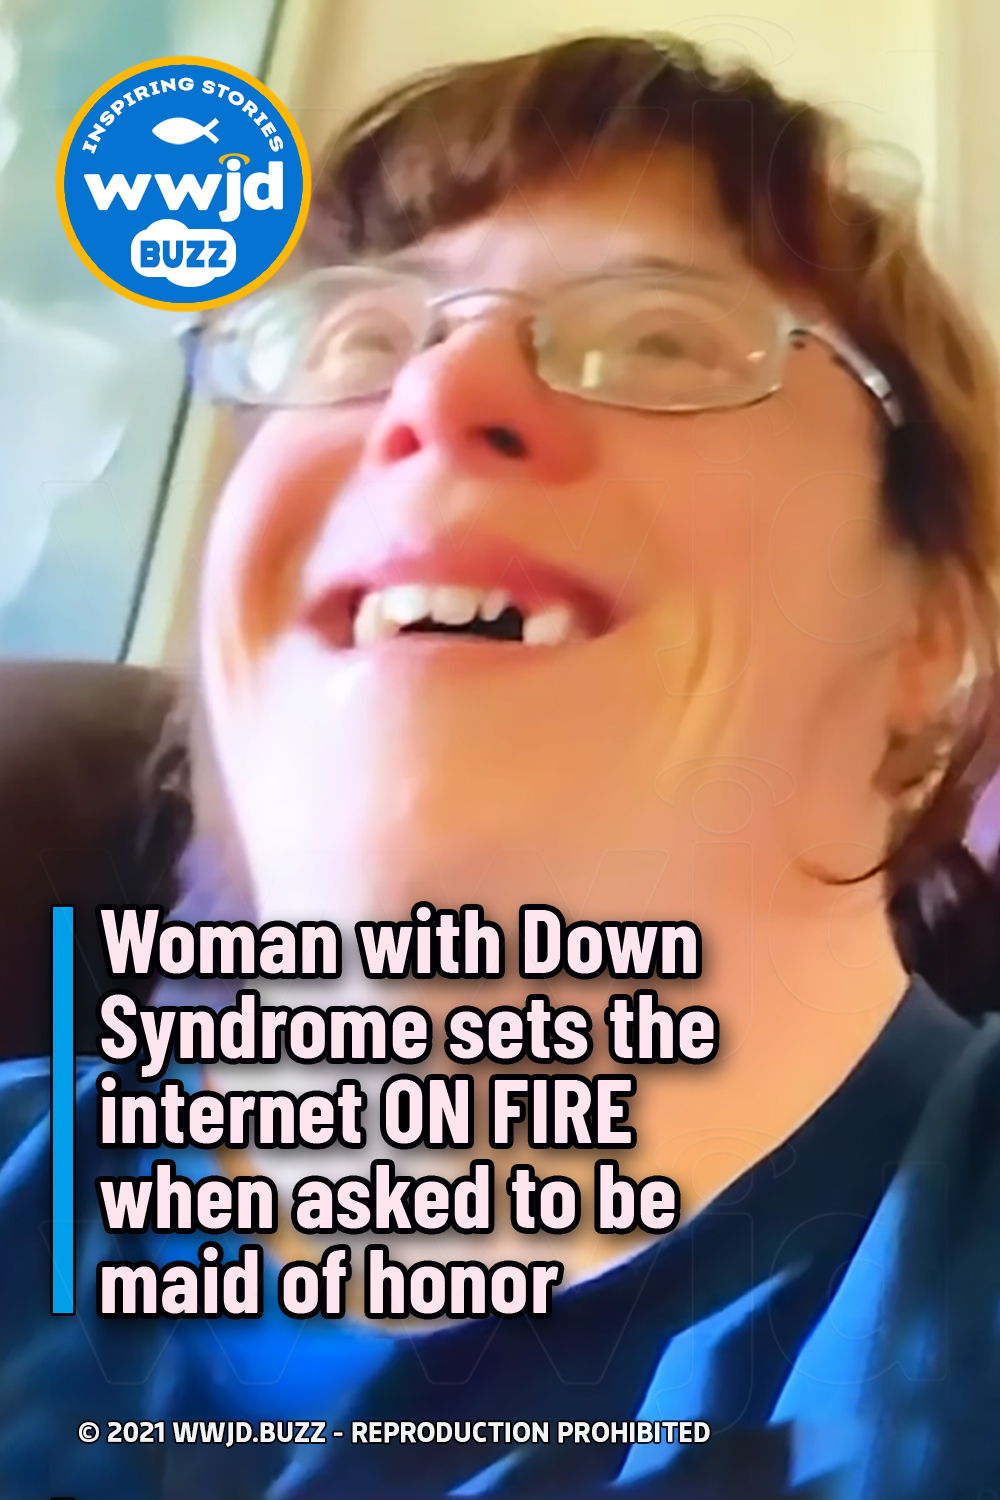 Woman with Down Syndrome sets the internet ON FIRE when asked to be maid of honor